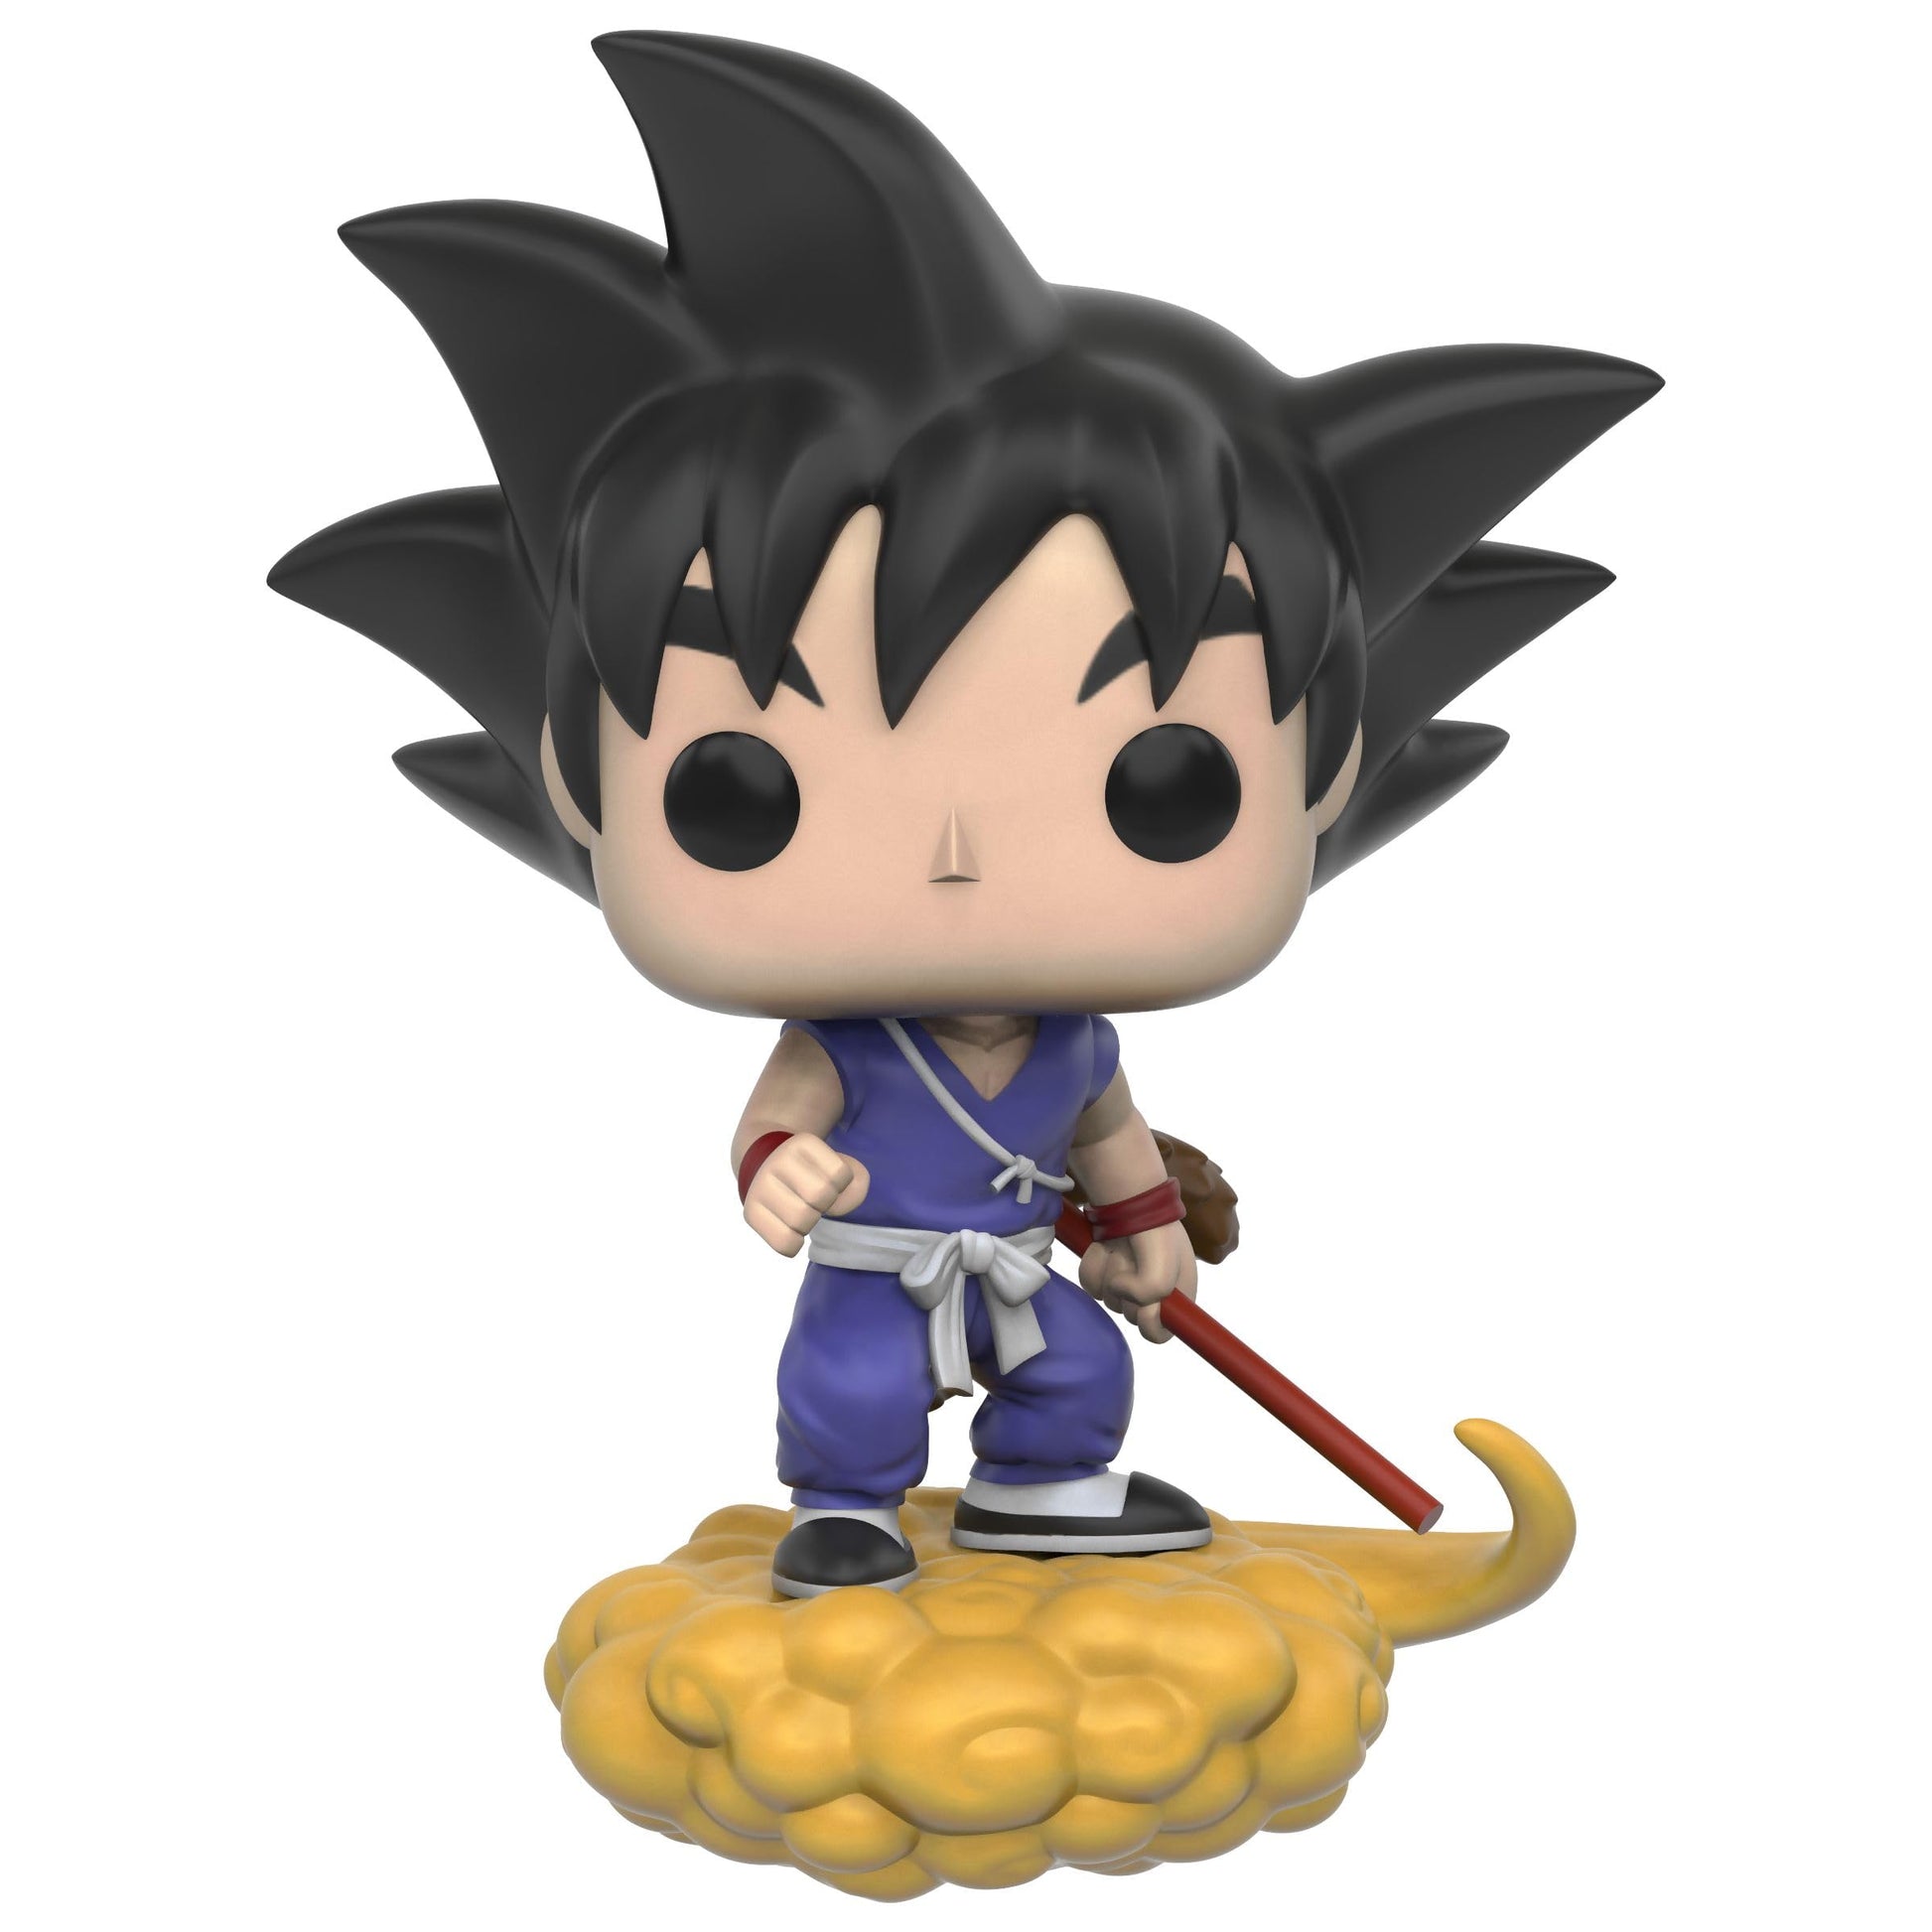 Funko POP! Vinyl - Dragonball Z - Goku and Nimbus Figure - Collectable Vinyl Figure - Gift Idea - Official Merchandise - Toys for Kids & Adults - Anime Fans - Model Figure for Collectors and Display - Zippigames